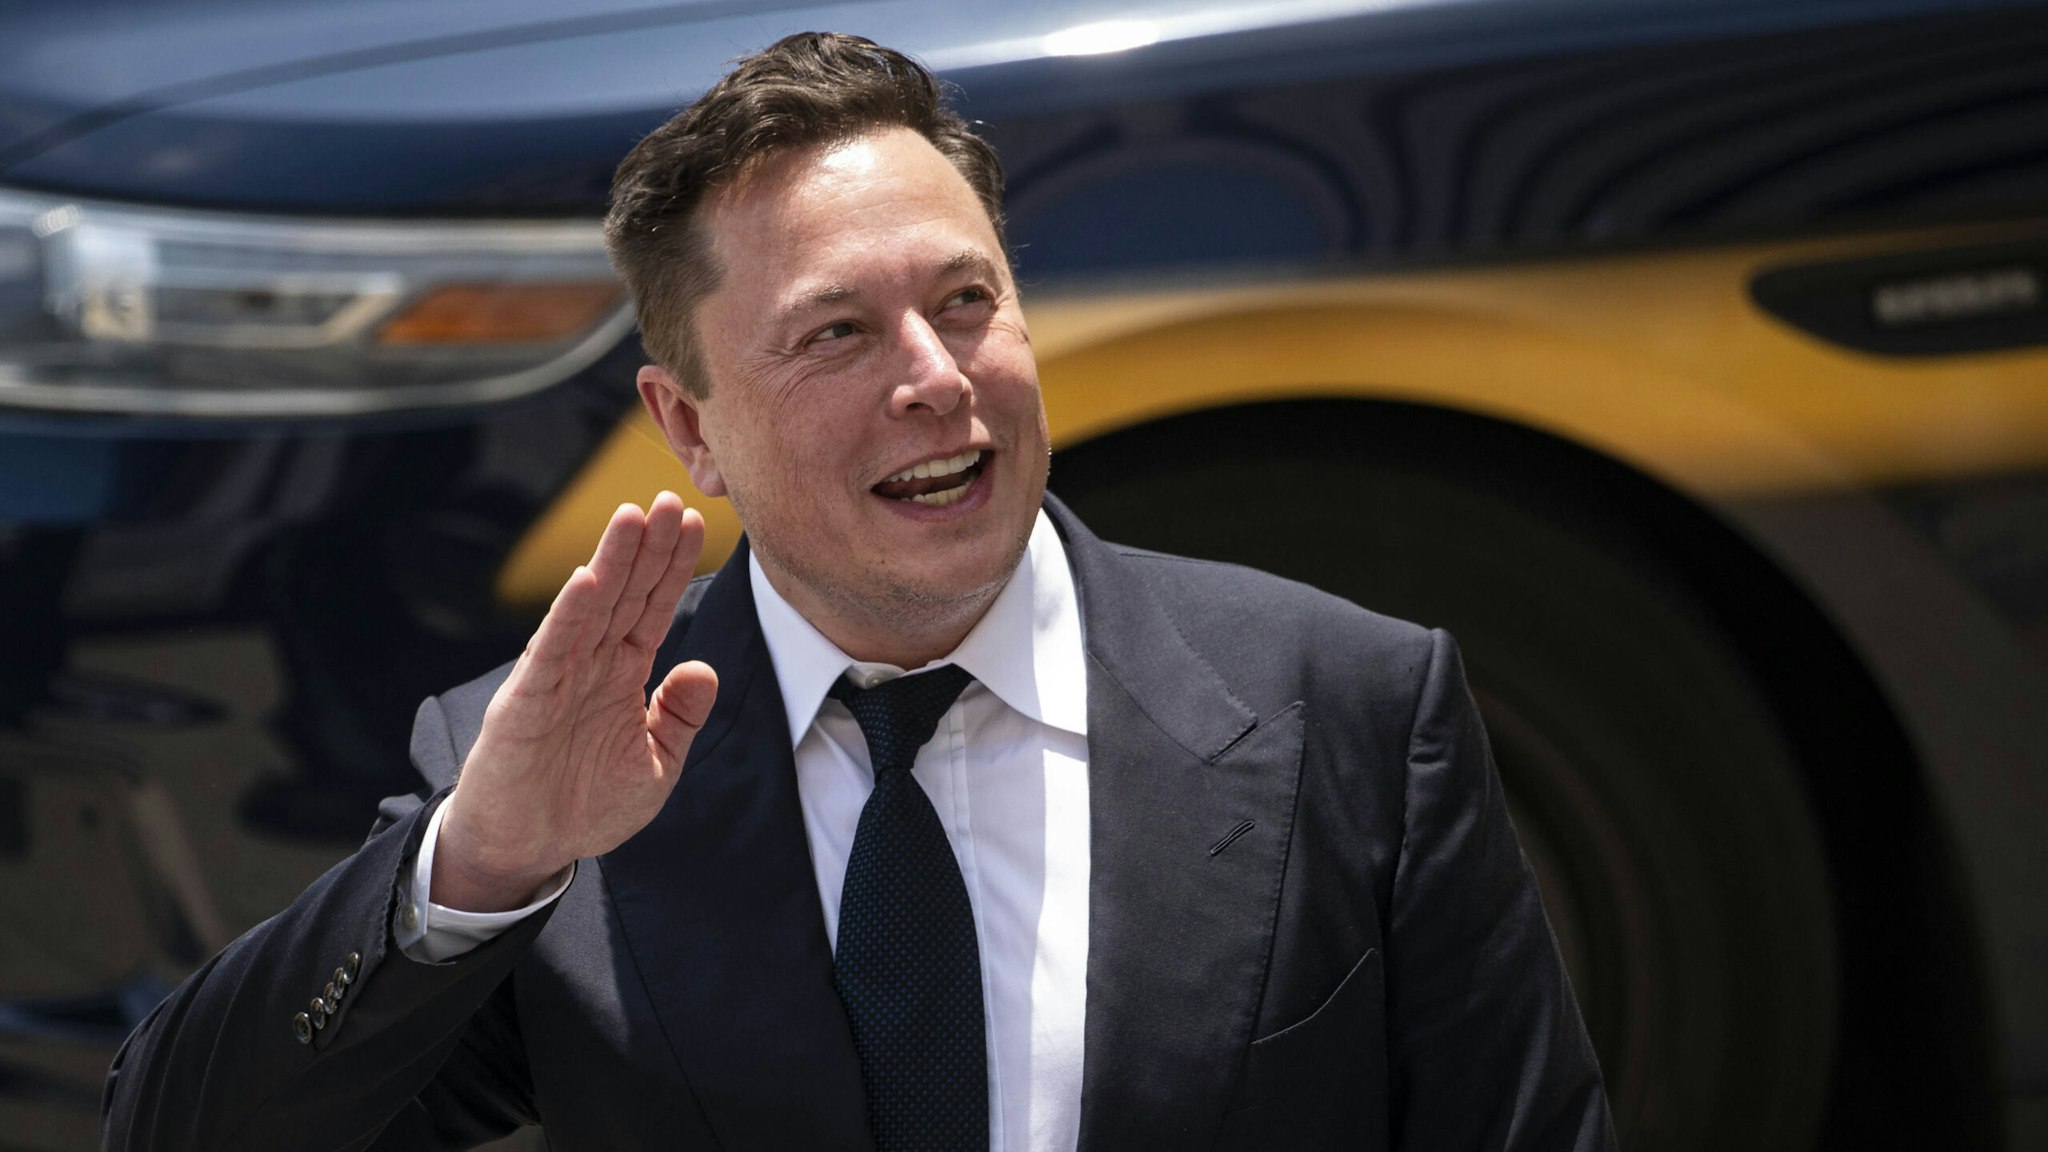 Elon Musk, chief executive officer of Tesla Inc., waves while departing court during the SolarCity trial in Wilmington, Delaware, U.S., on Tuesday, July 13, 2021. Musk was cool but combative as he testified in a Delaware courtroom that Tesla's more than $2 billion acquisition of SolarCity in 2016 wasn't a bailout of the struggling solar provider.